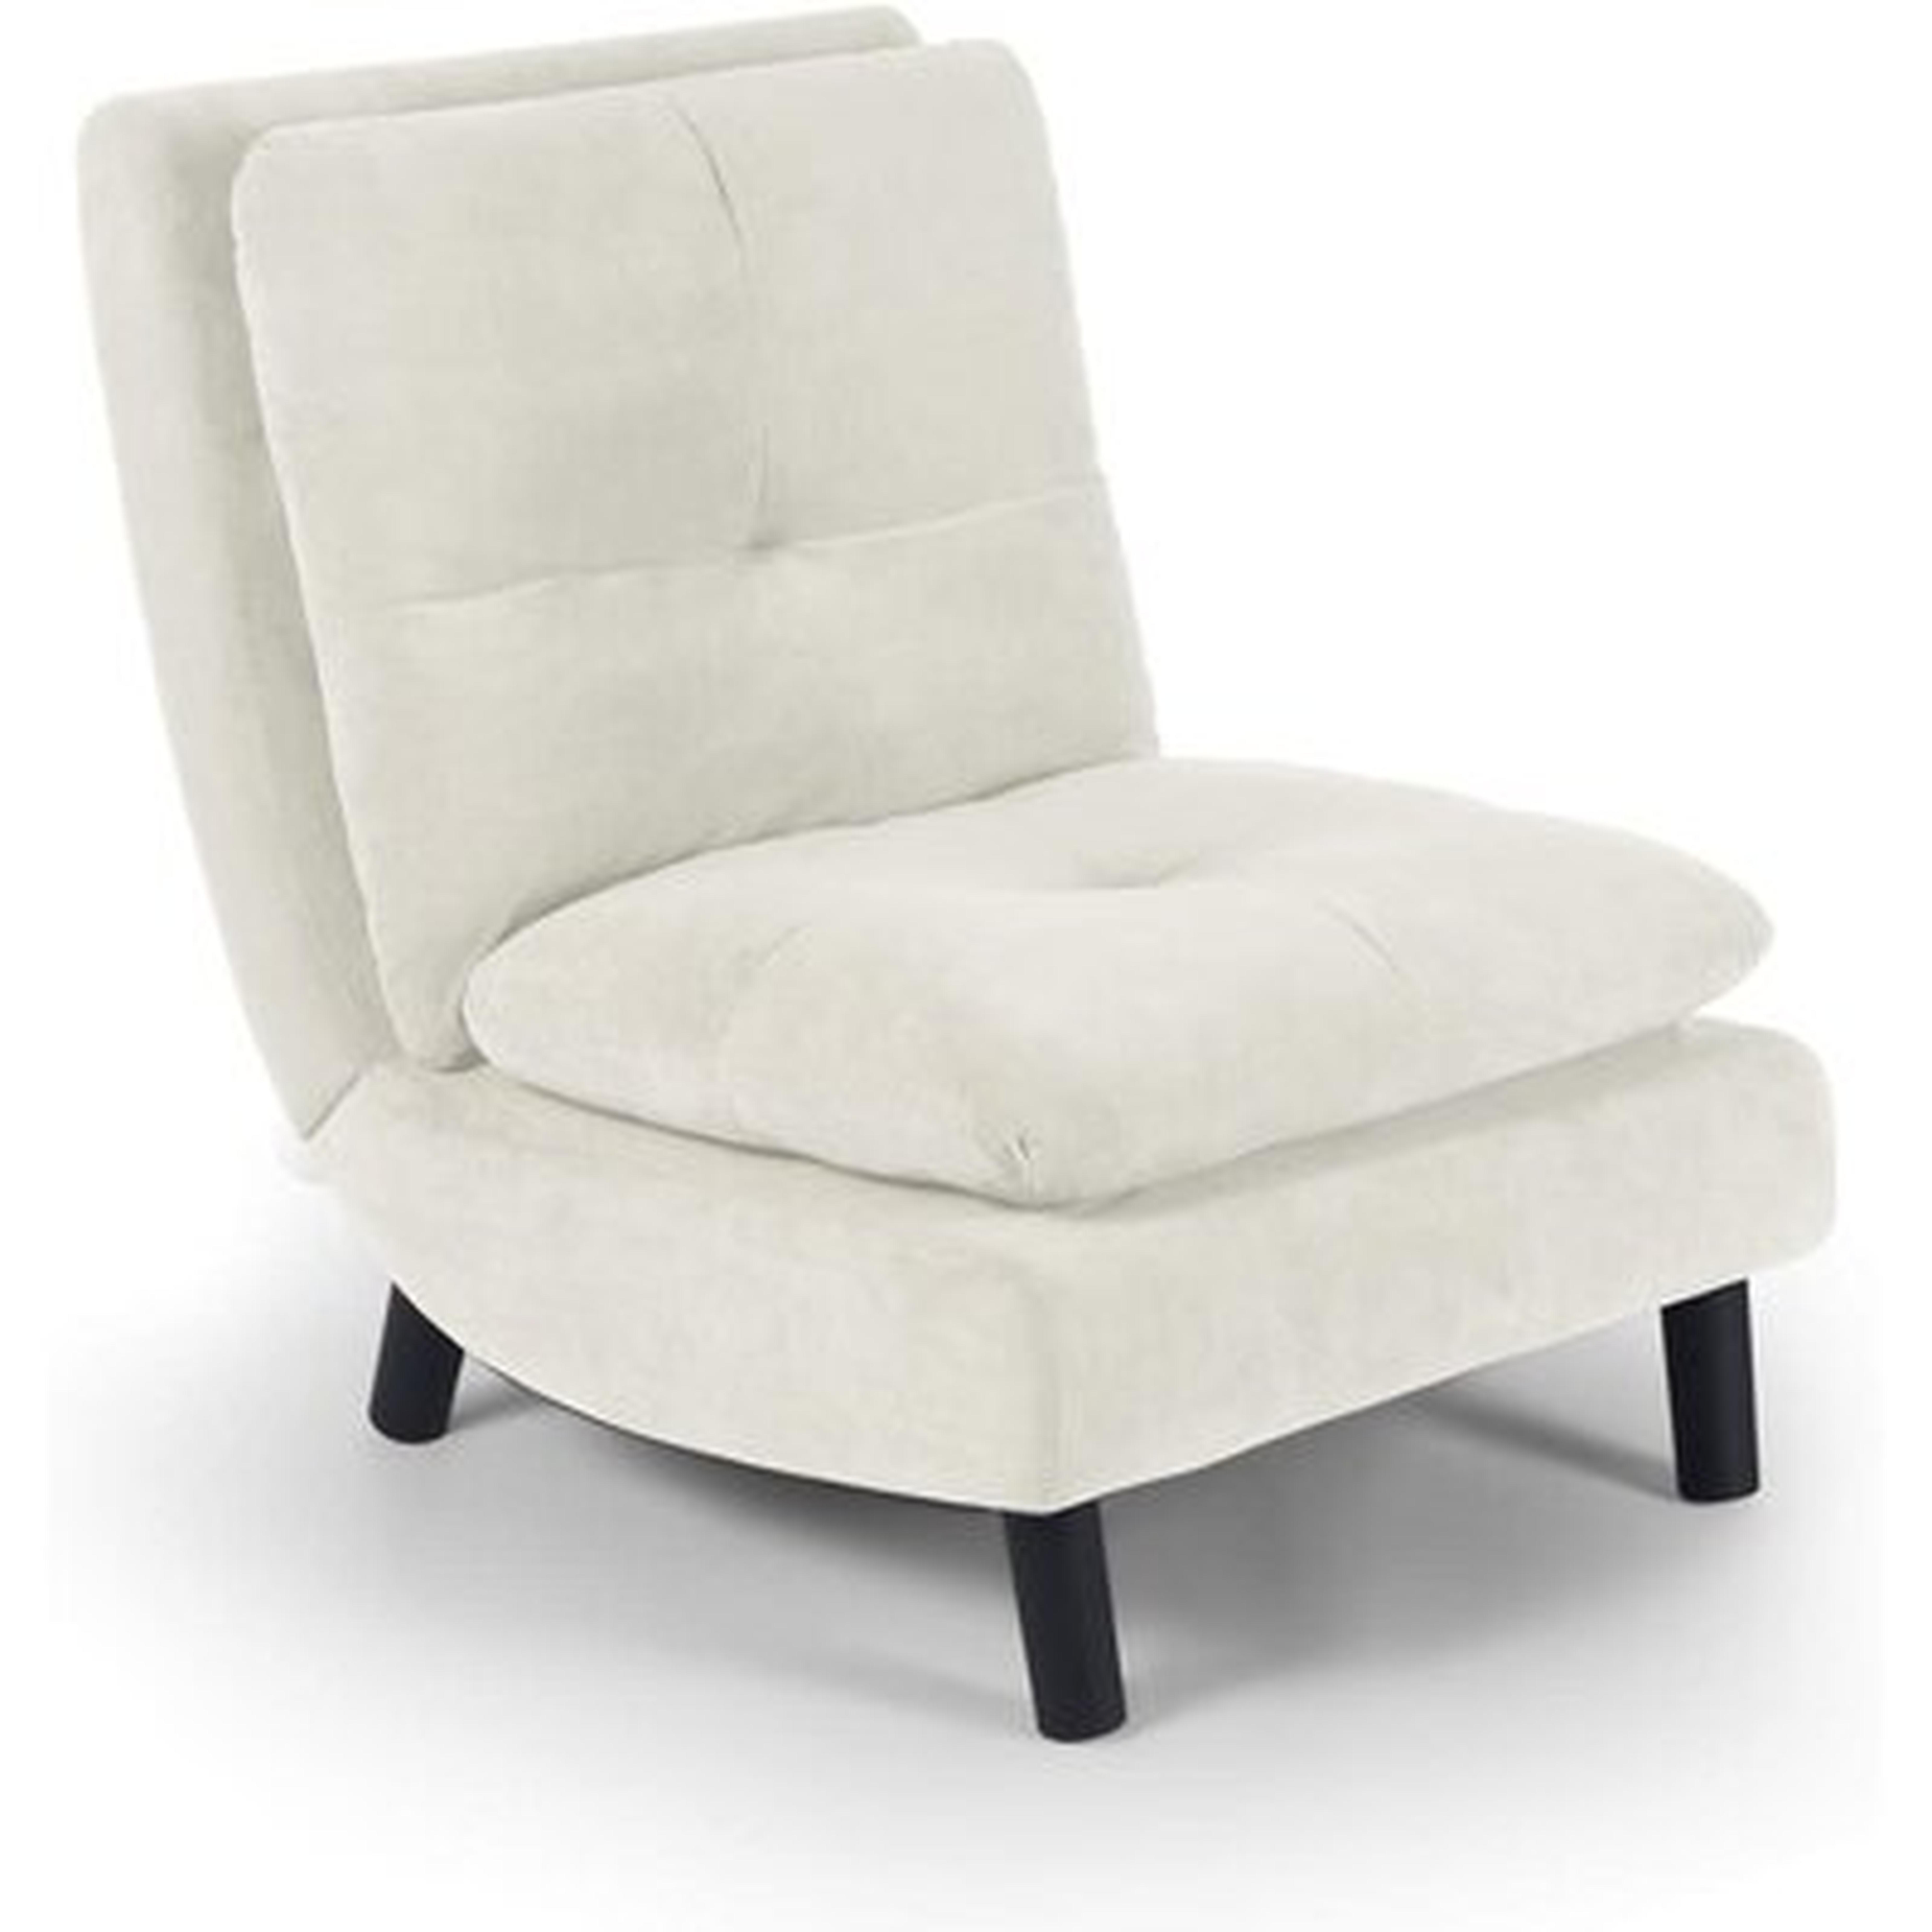 Lundy 27.17" W Tufted Cotton Lounge Chair - Wayfair